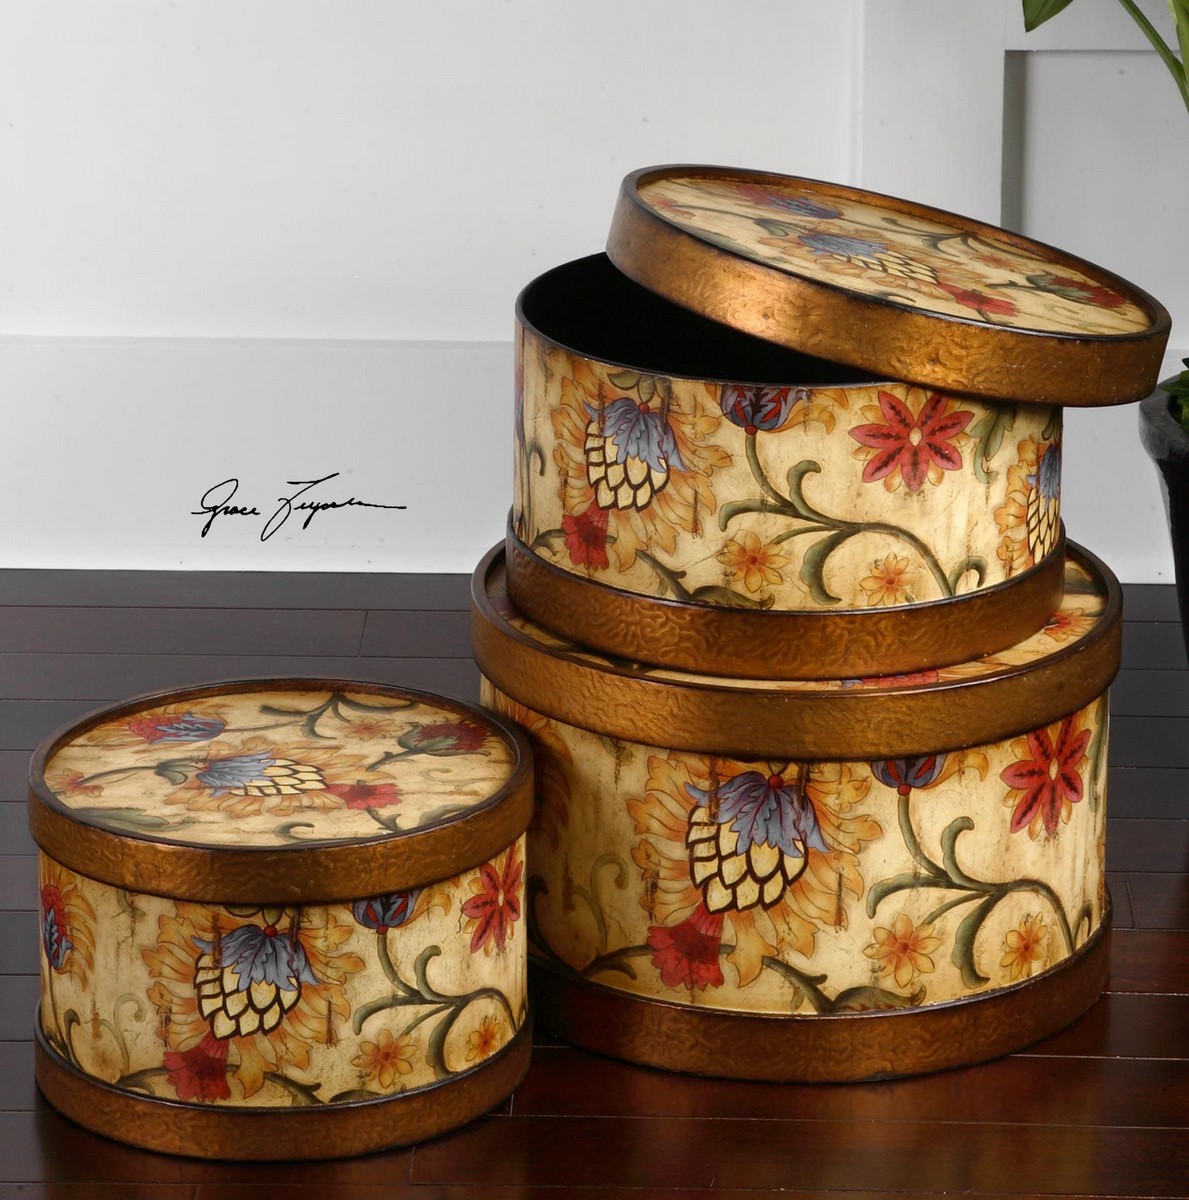 Uttermost Winola Colorful Metal Boxes - Set of 3